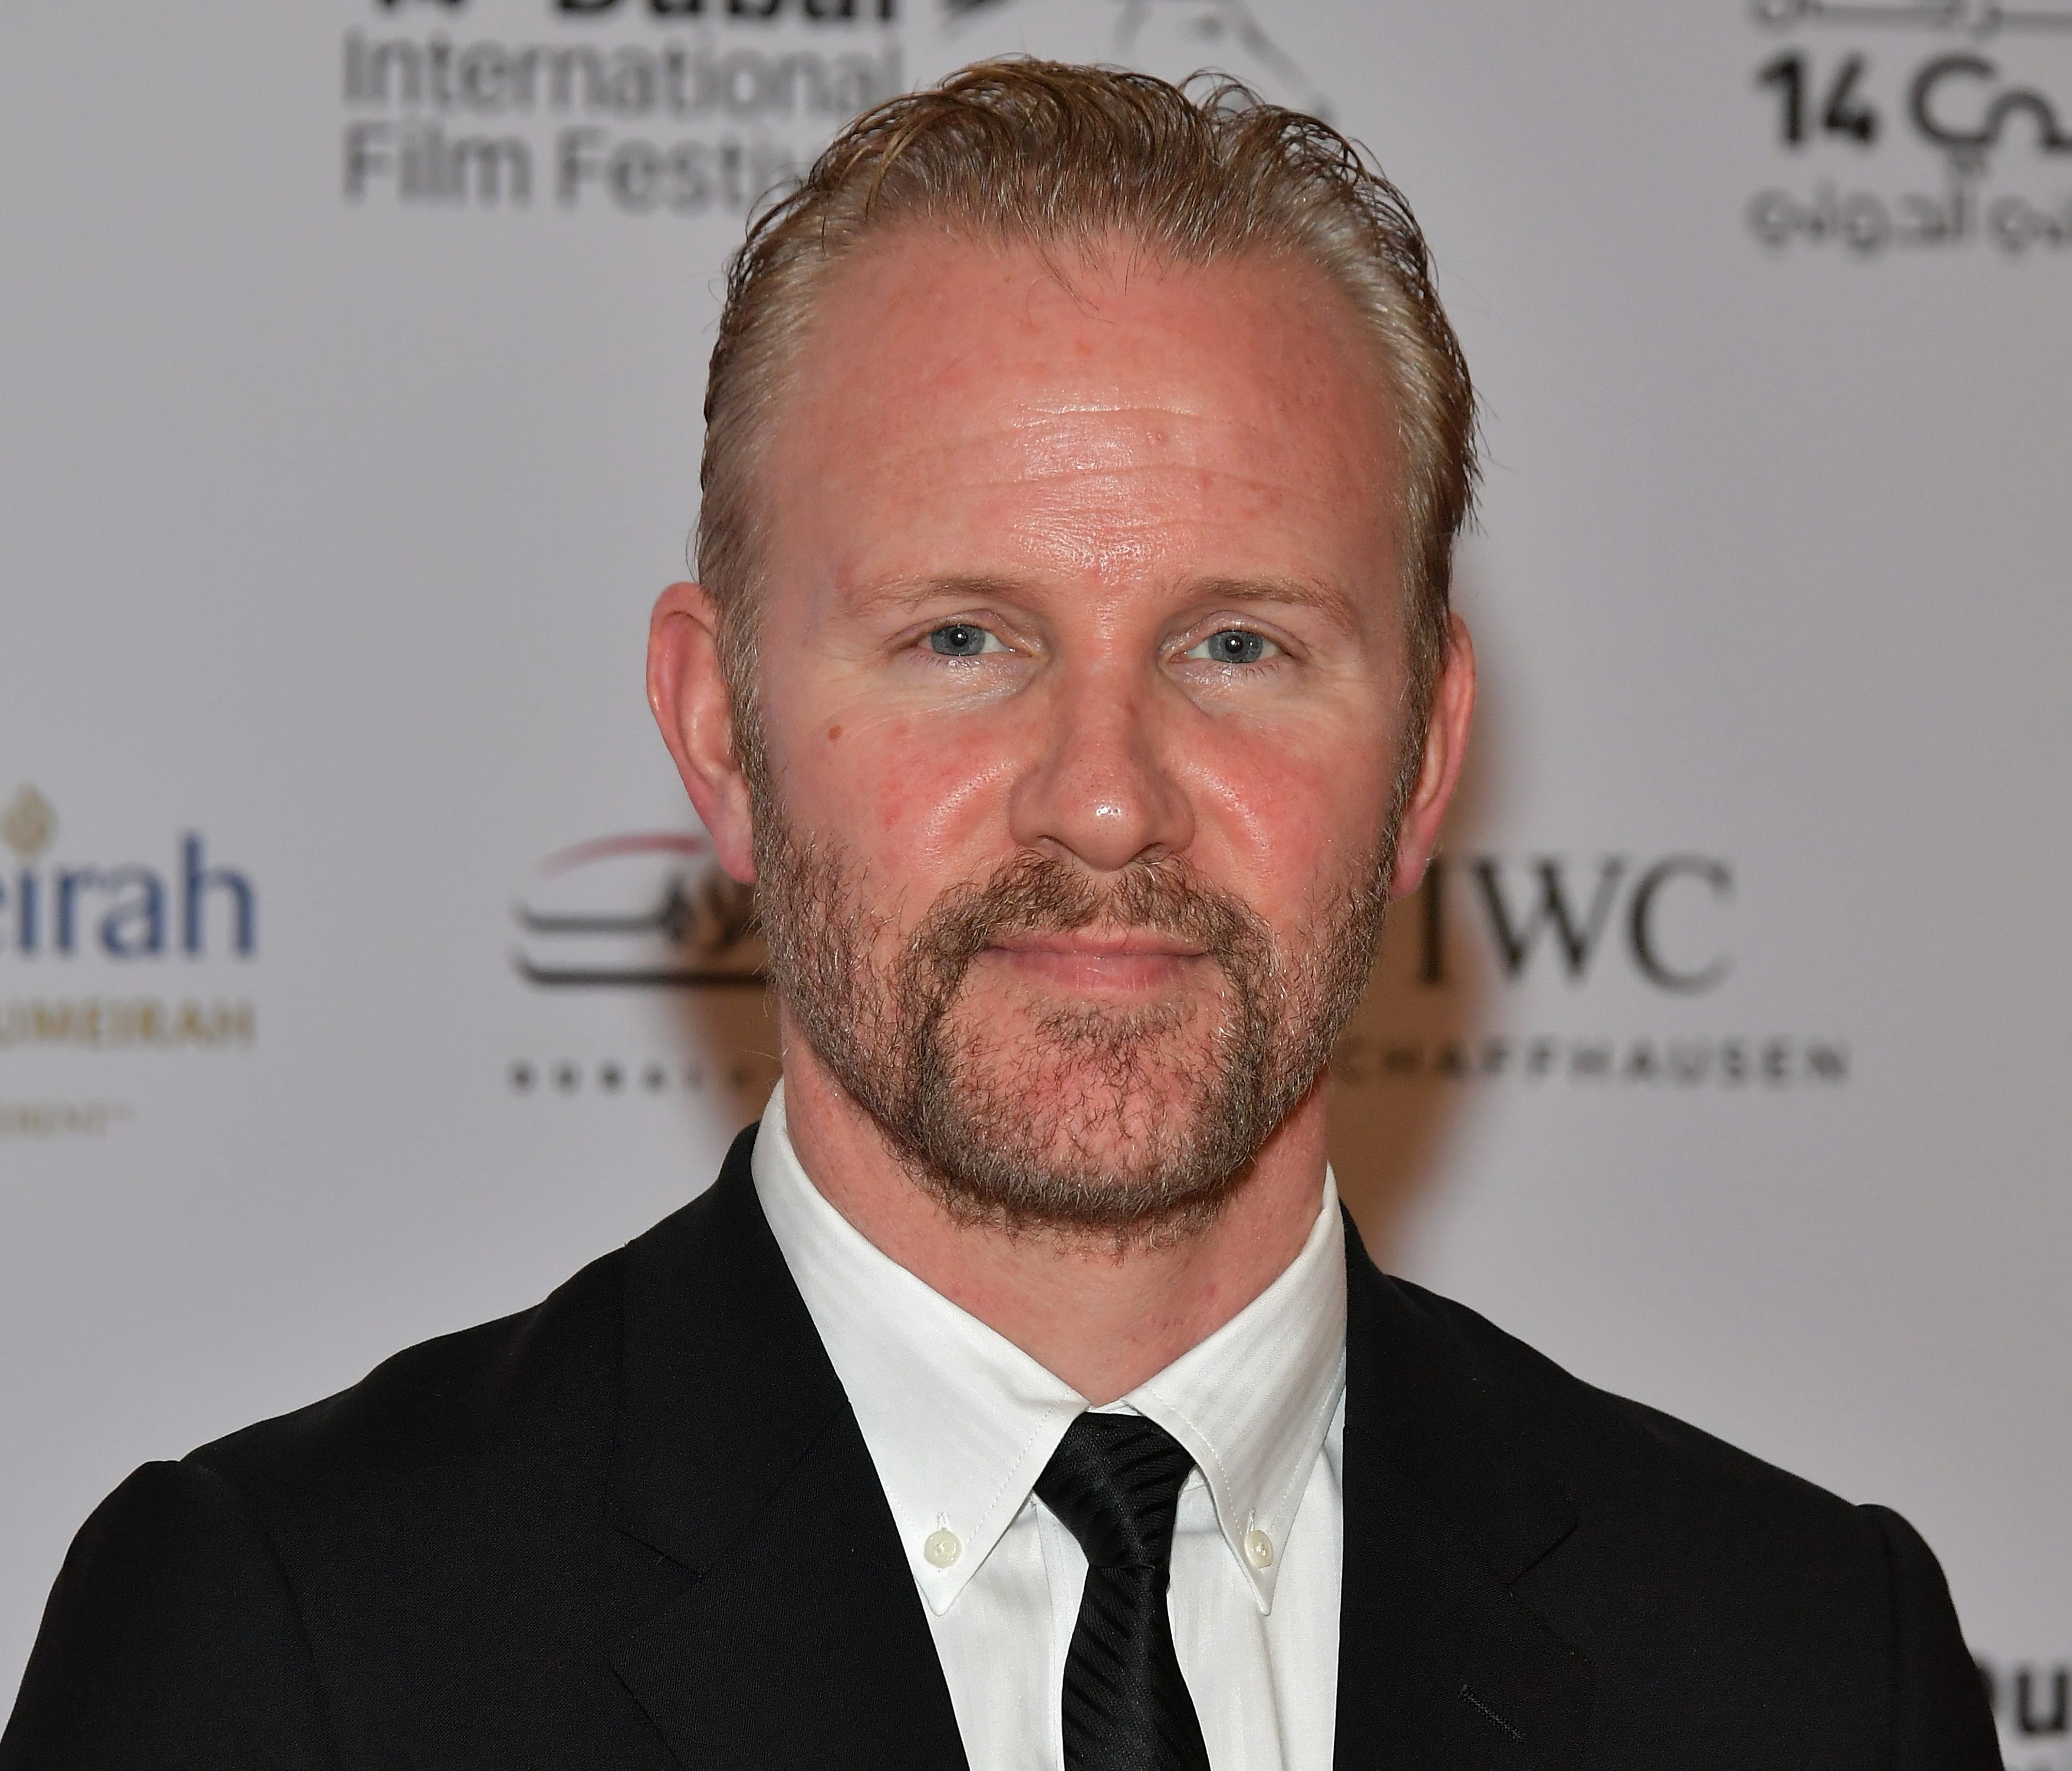 Director Morgan Spurlock has written a confessional about his own history of misconduct.